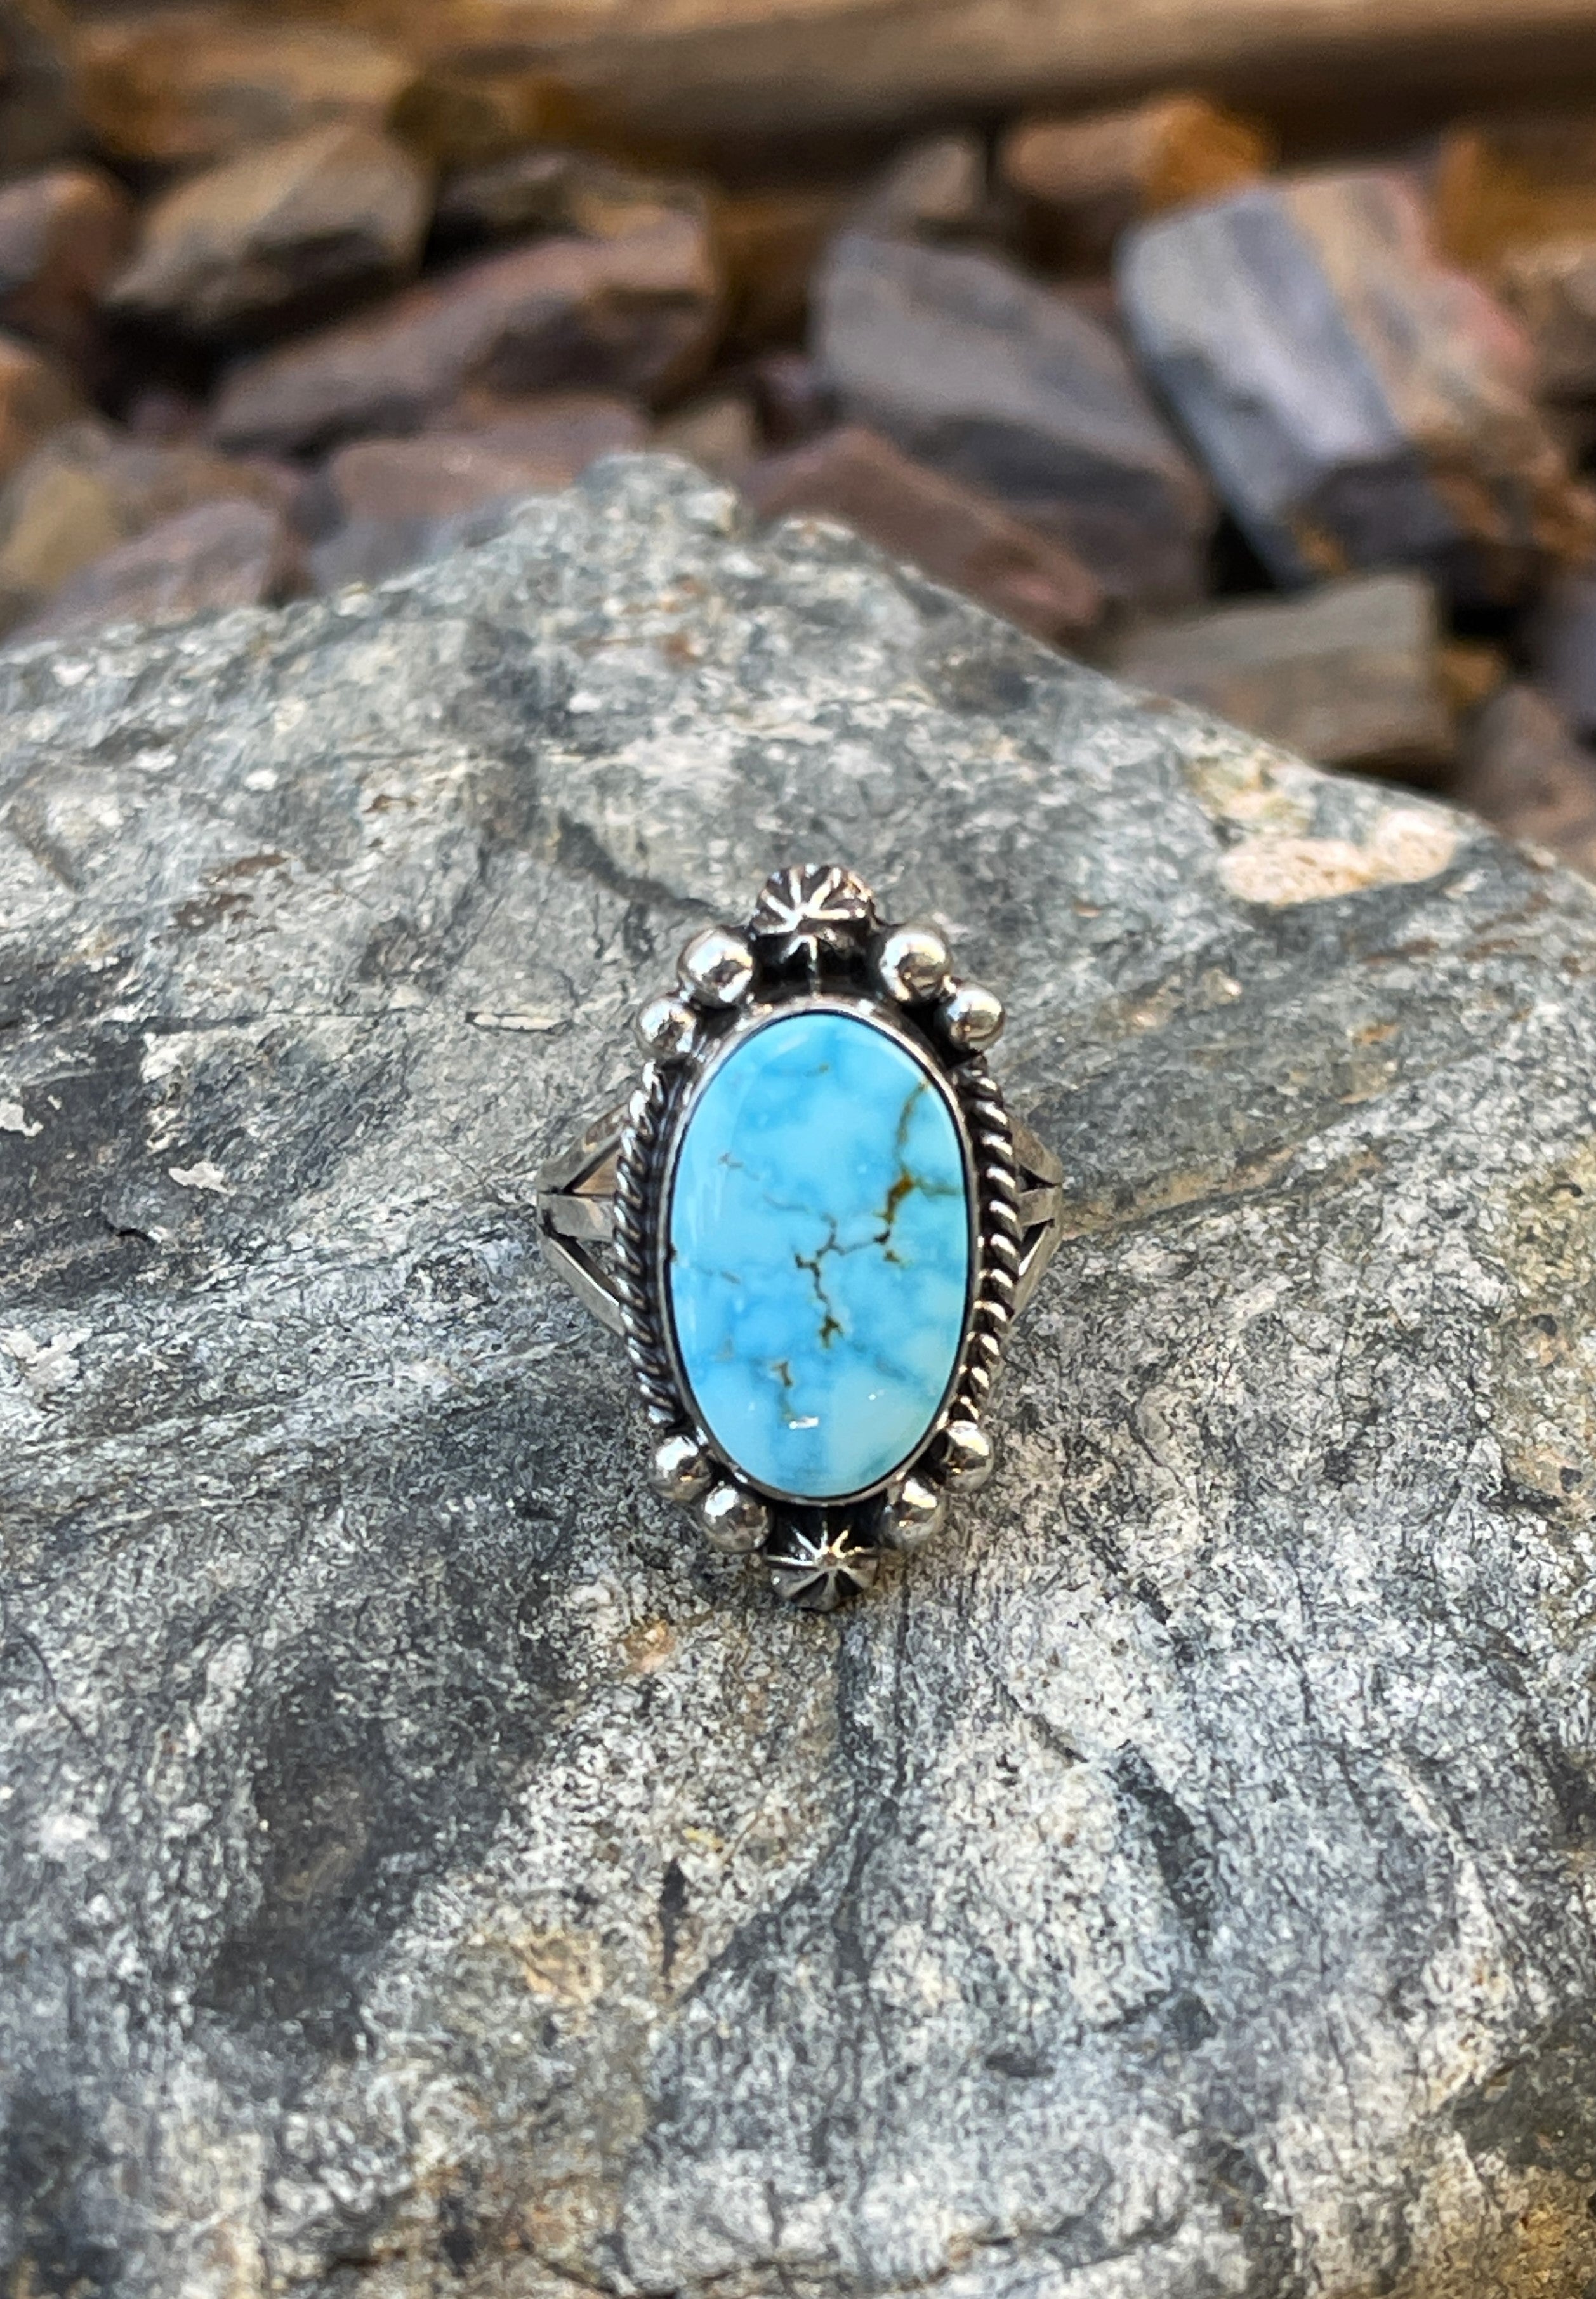 Handmade Solid Sterling Silver Turquoise Mountain Ring with Stamp Beads - Size 6 1/2